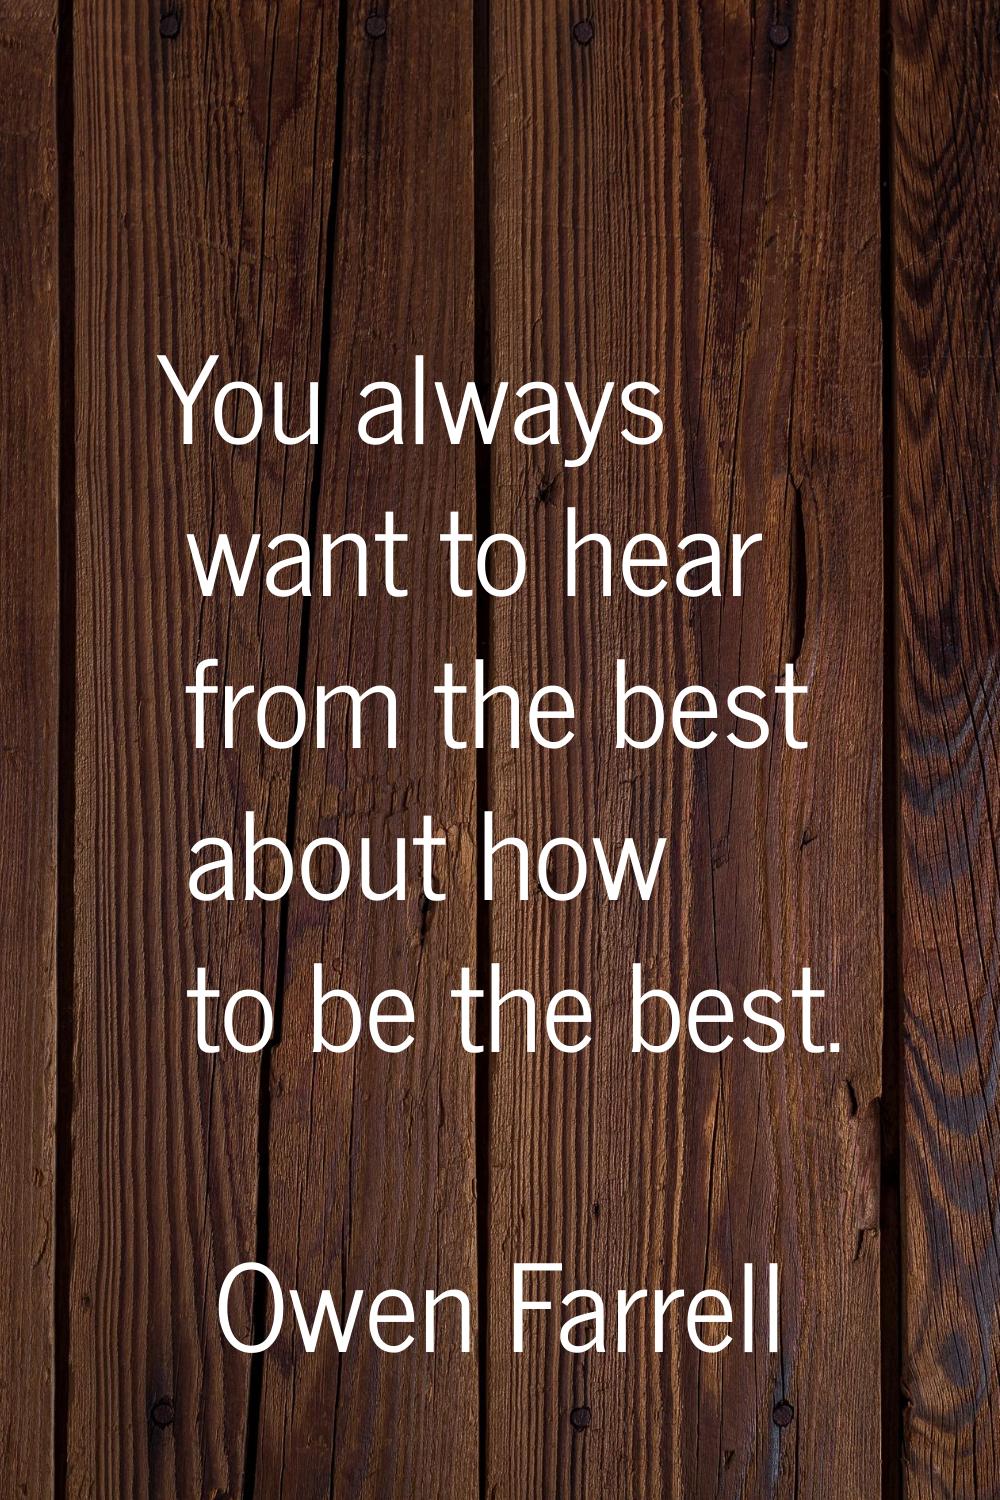 You always want to hear from the best about how to be the best.